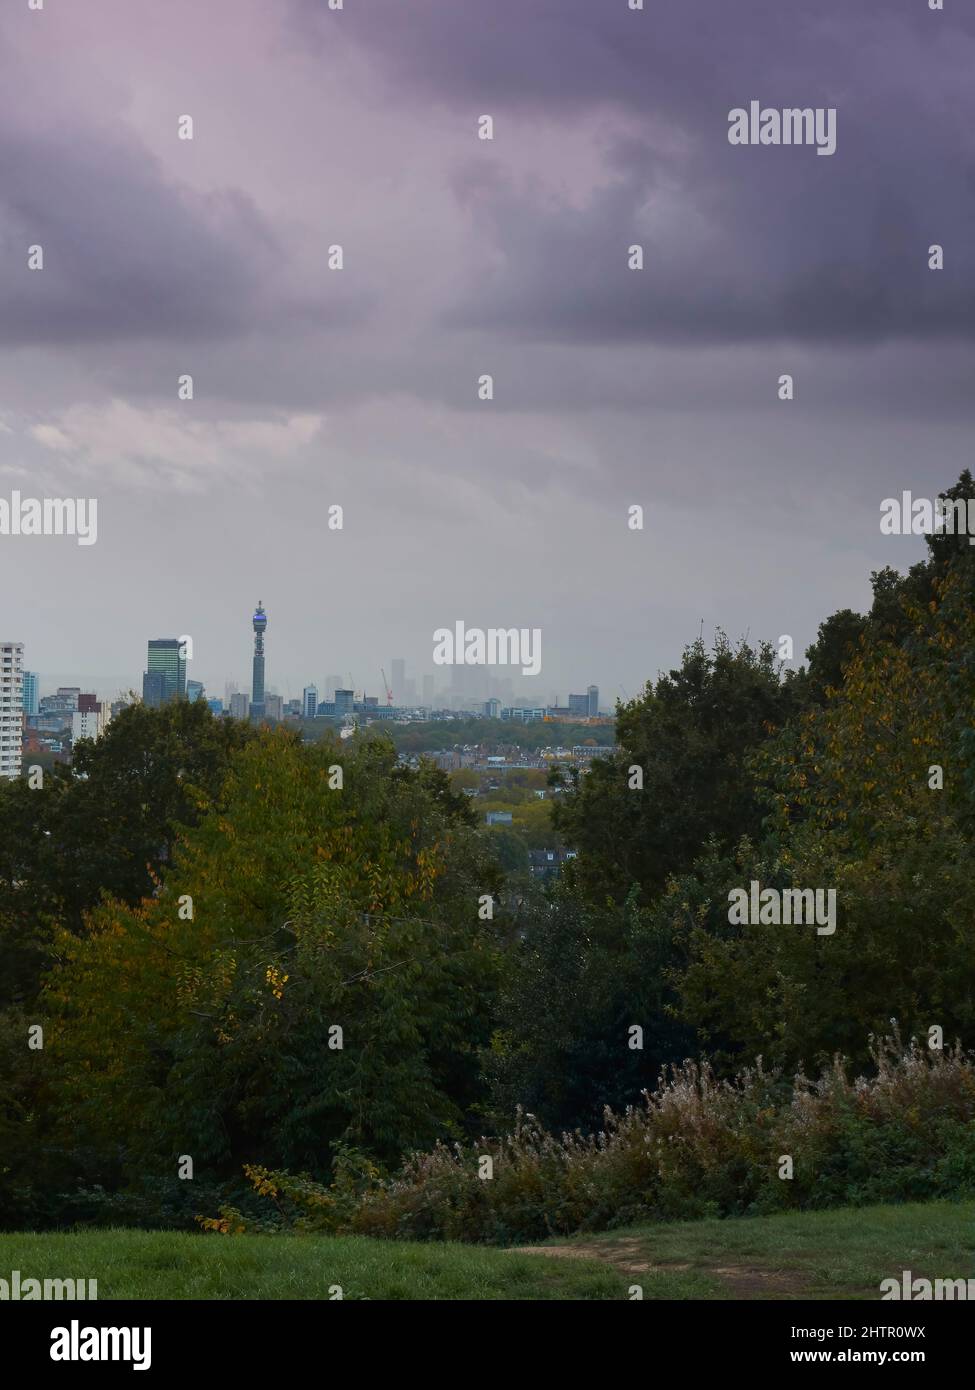 A London skyline from Parliament Hill Fields, with the buildings pressed under a heavy, leaden sky of near impenetrable layer of clouds. Stock Photo